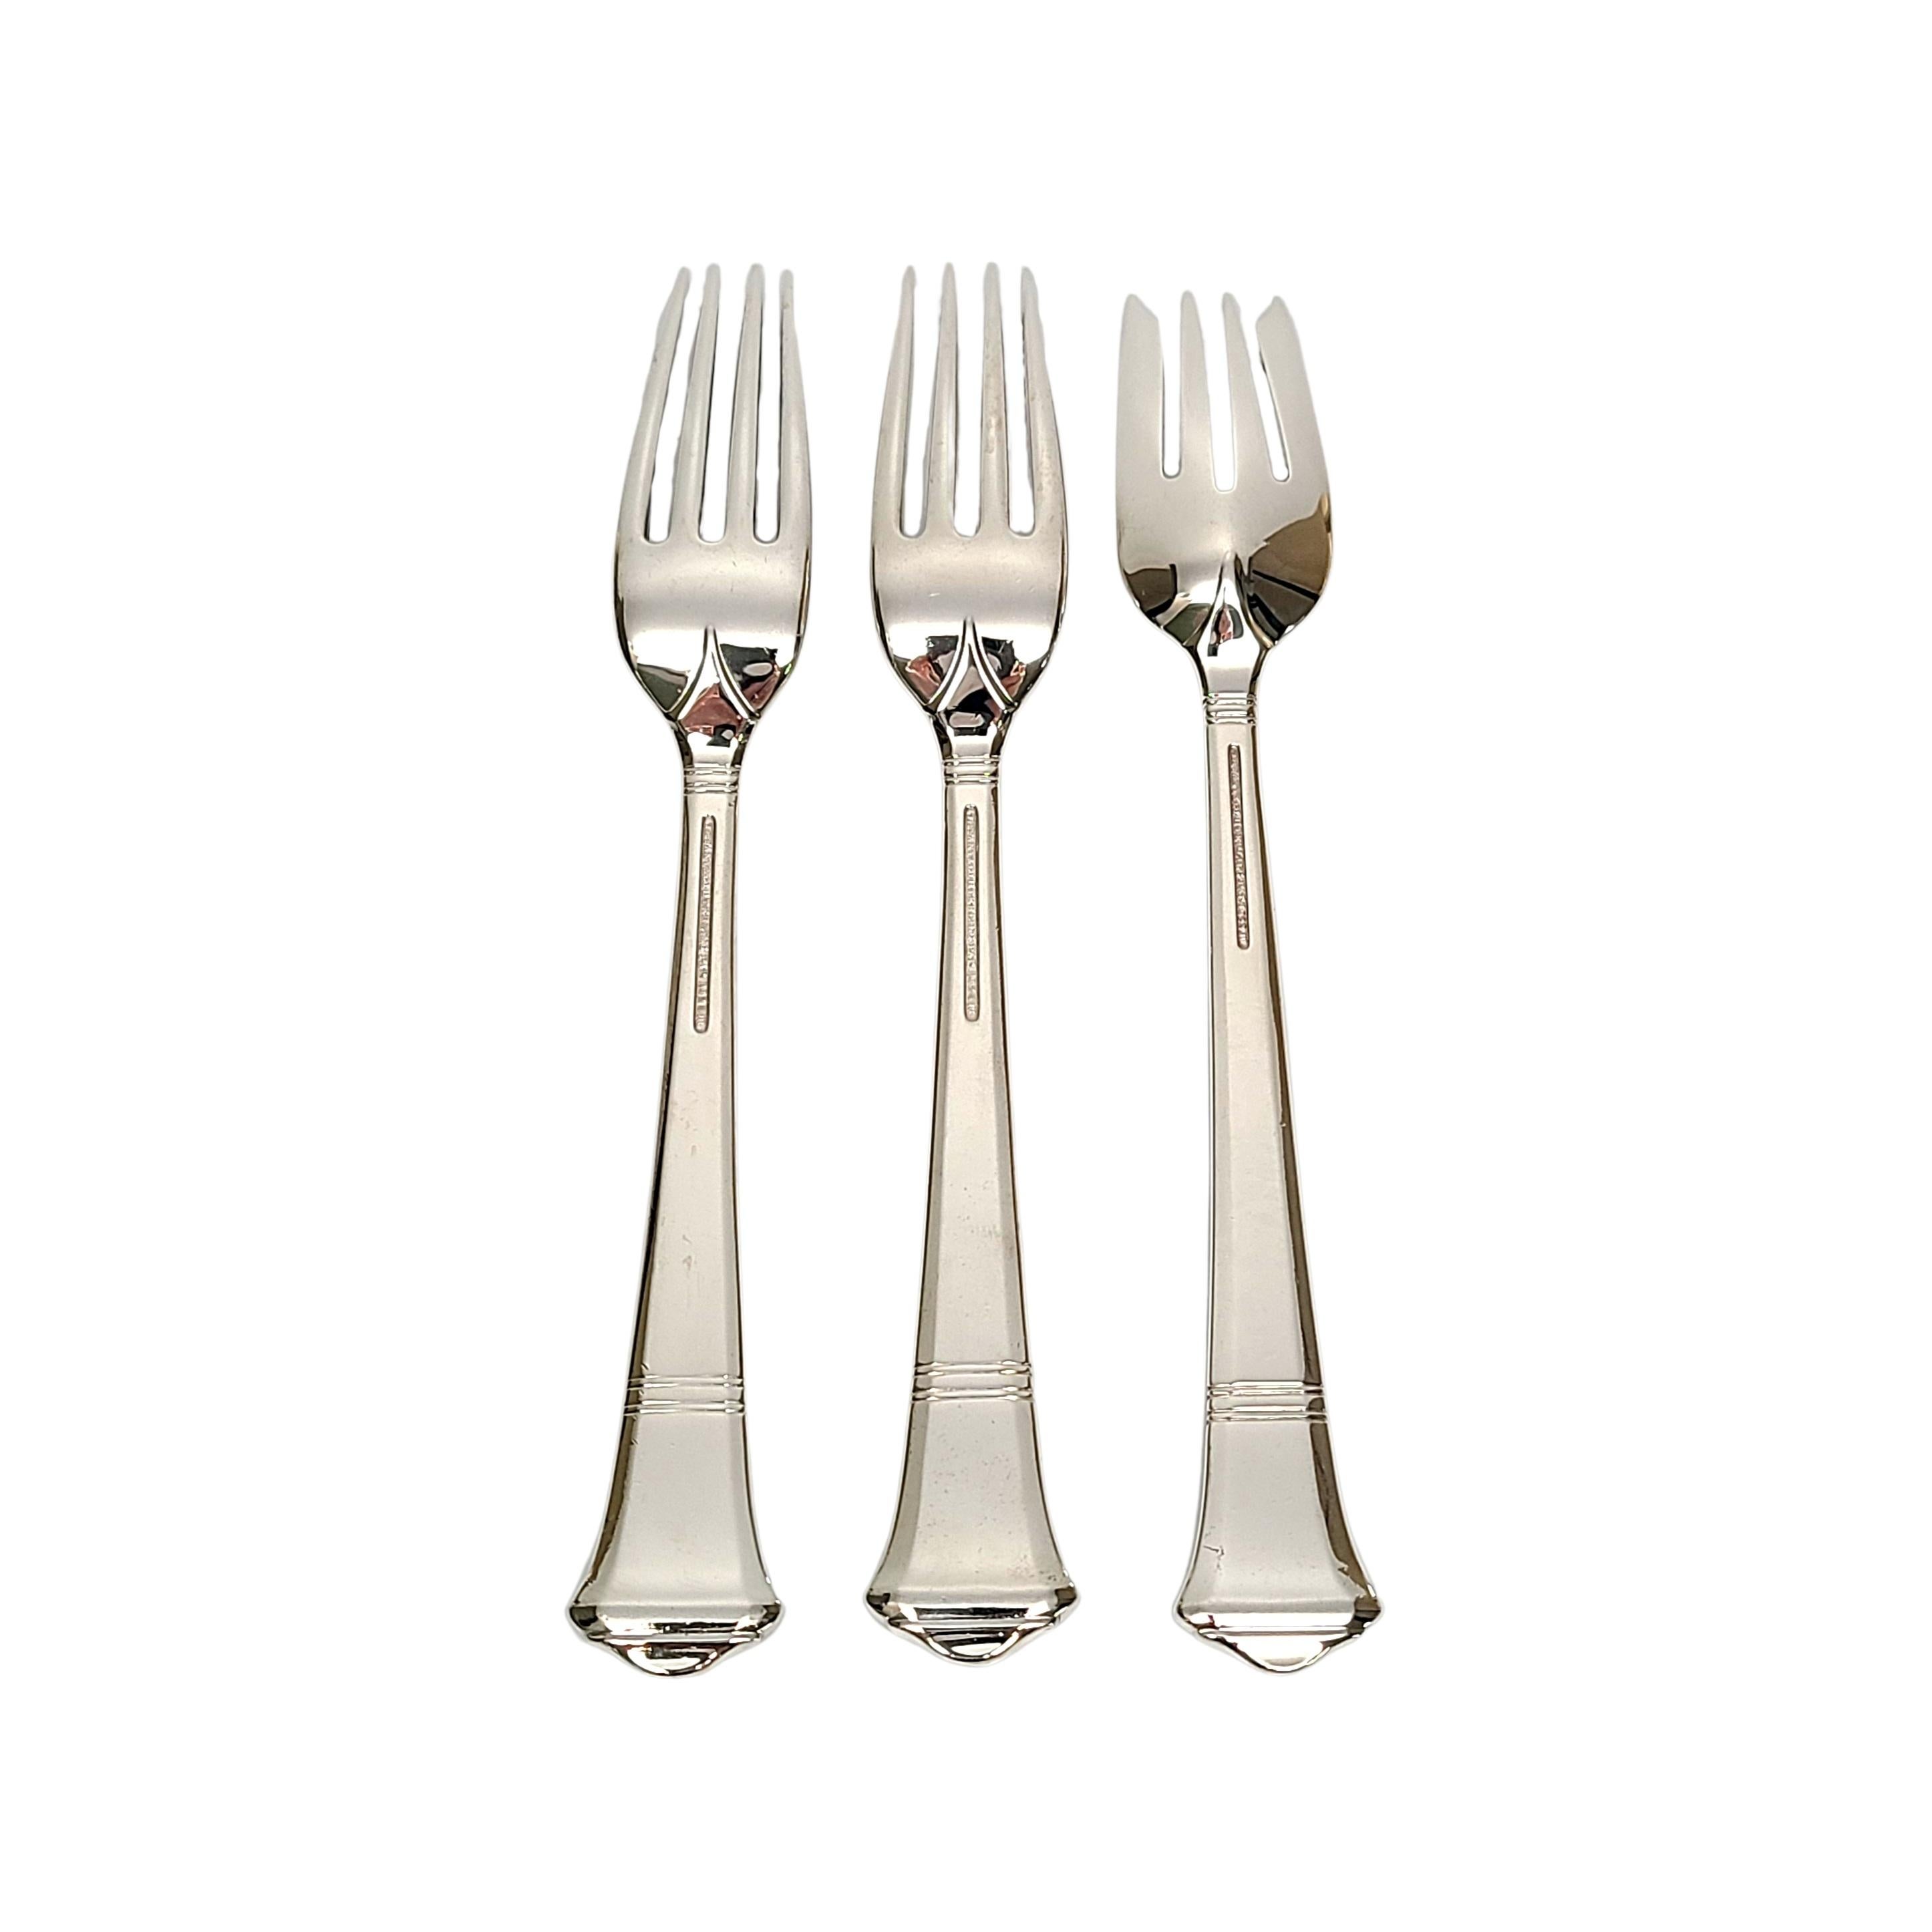 Set of 3 sterling silver forks, by Tiffany & Co in the Windham pattern. 

No monogram

Set of 3 forks include 2 dinner forks and 1 salad fork. Designed by Arthur LeRoy Barney in 1923, the Windham pattern was named for a county in Eastern Connecticut